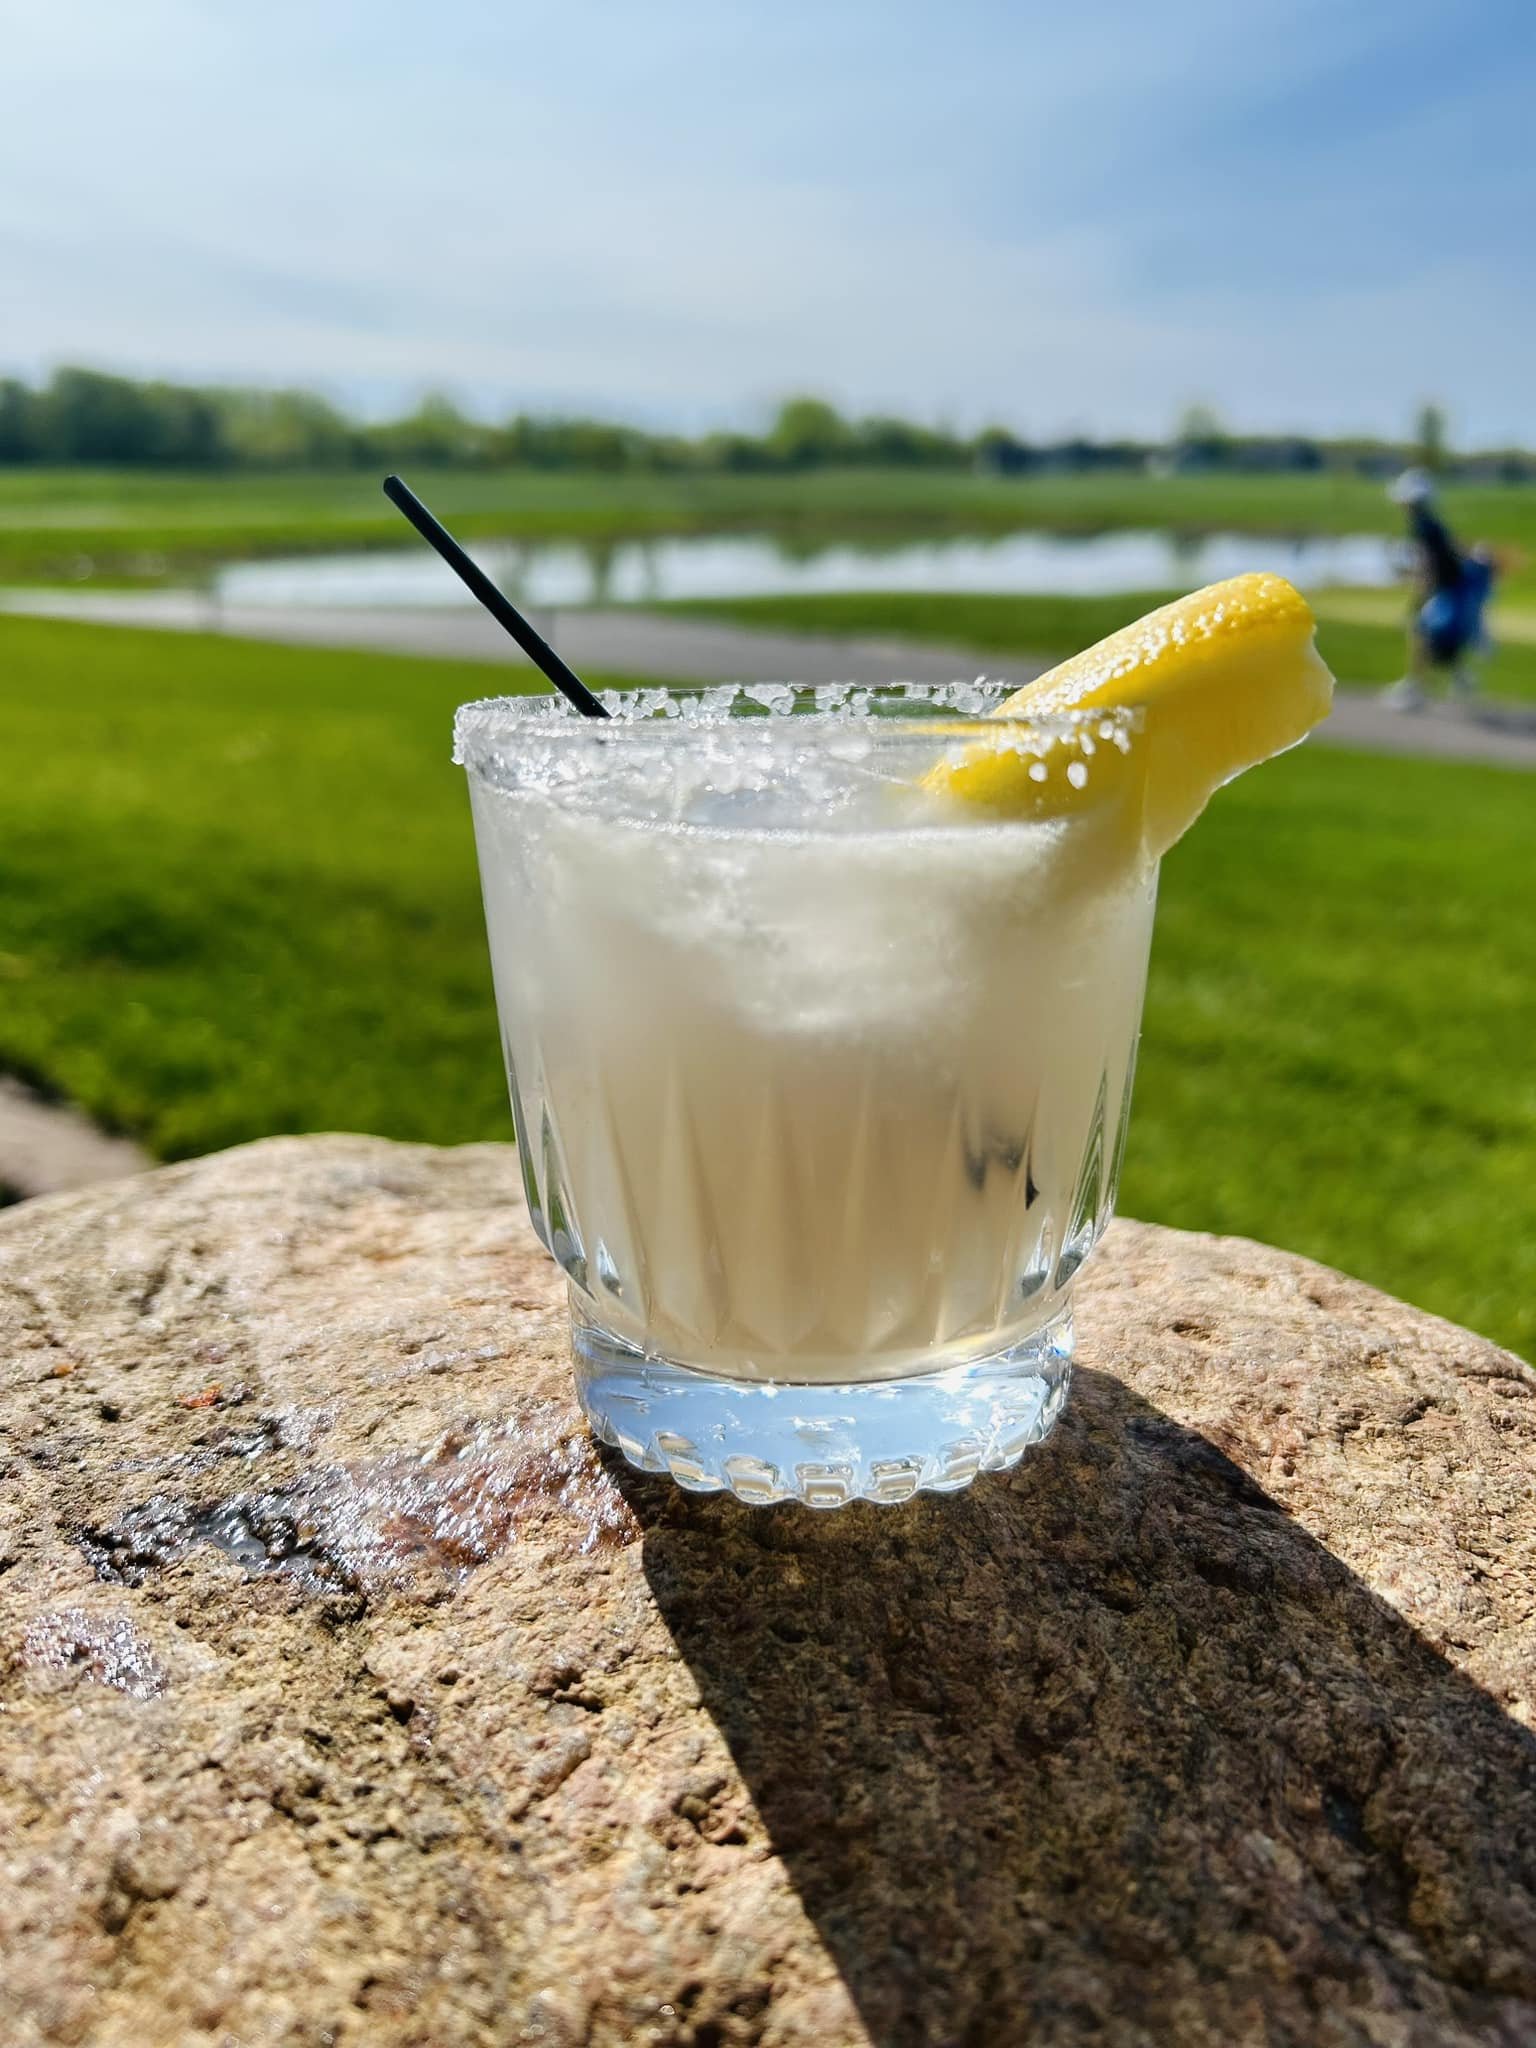 Ask for our Drink of the Day- Lemon Lavendar Margarita: $7

Perfect for patio sitting. 

Cheers! 

See you at the Turn! ⛳️